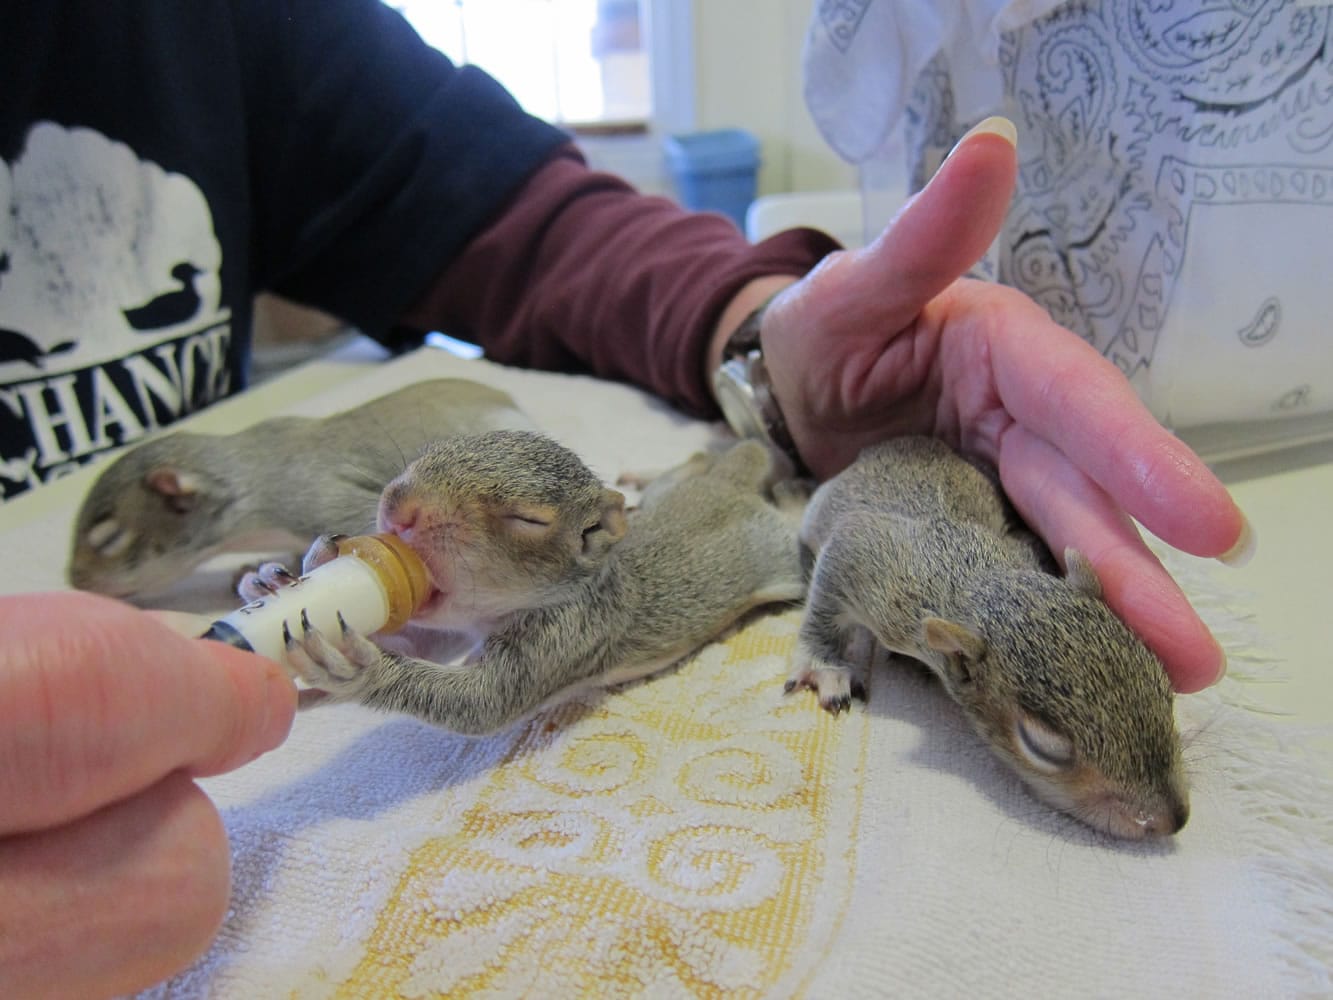 Baby squirrels are fed at Second Chance Wildlife Center in Gaithersburg, Md.